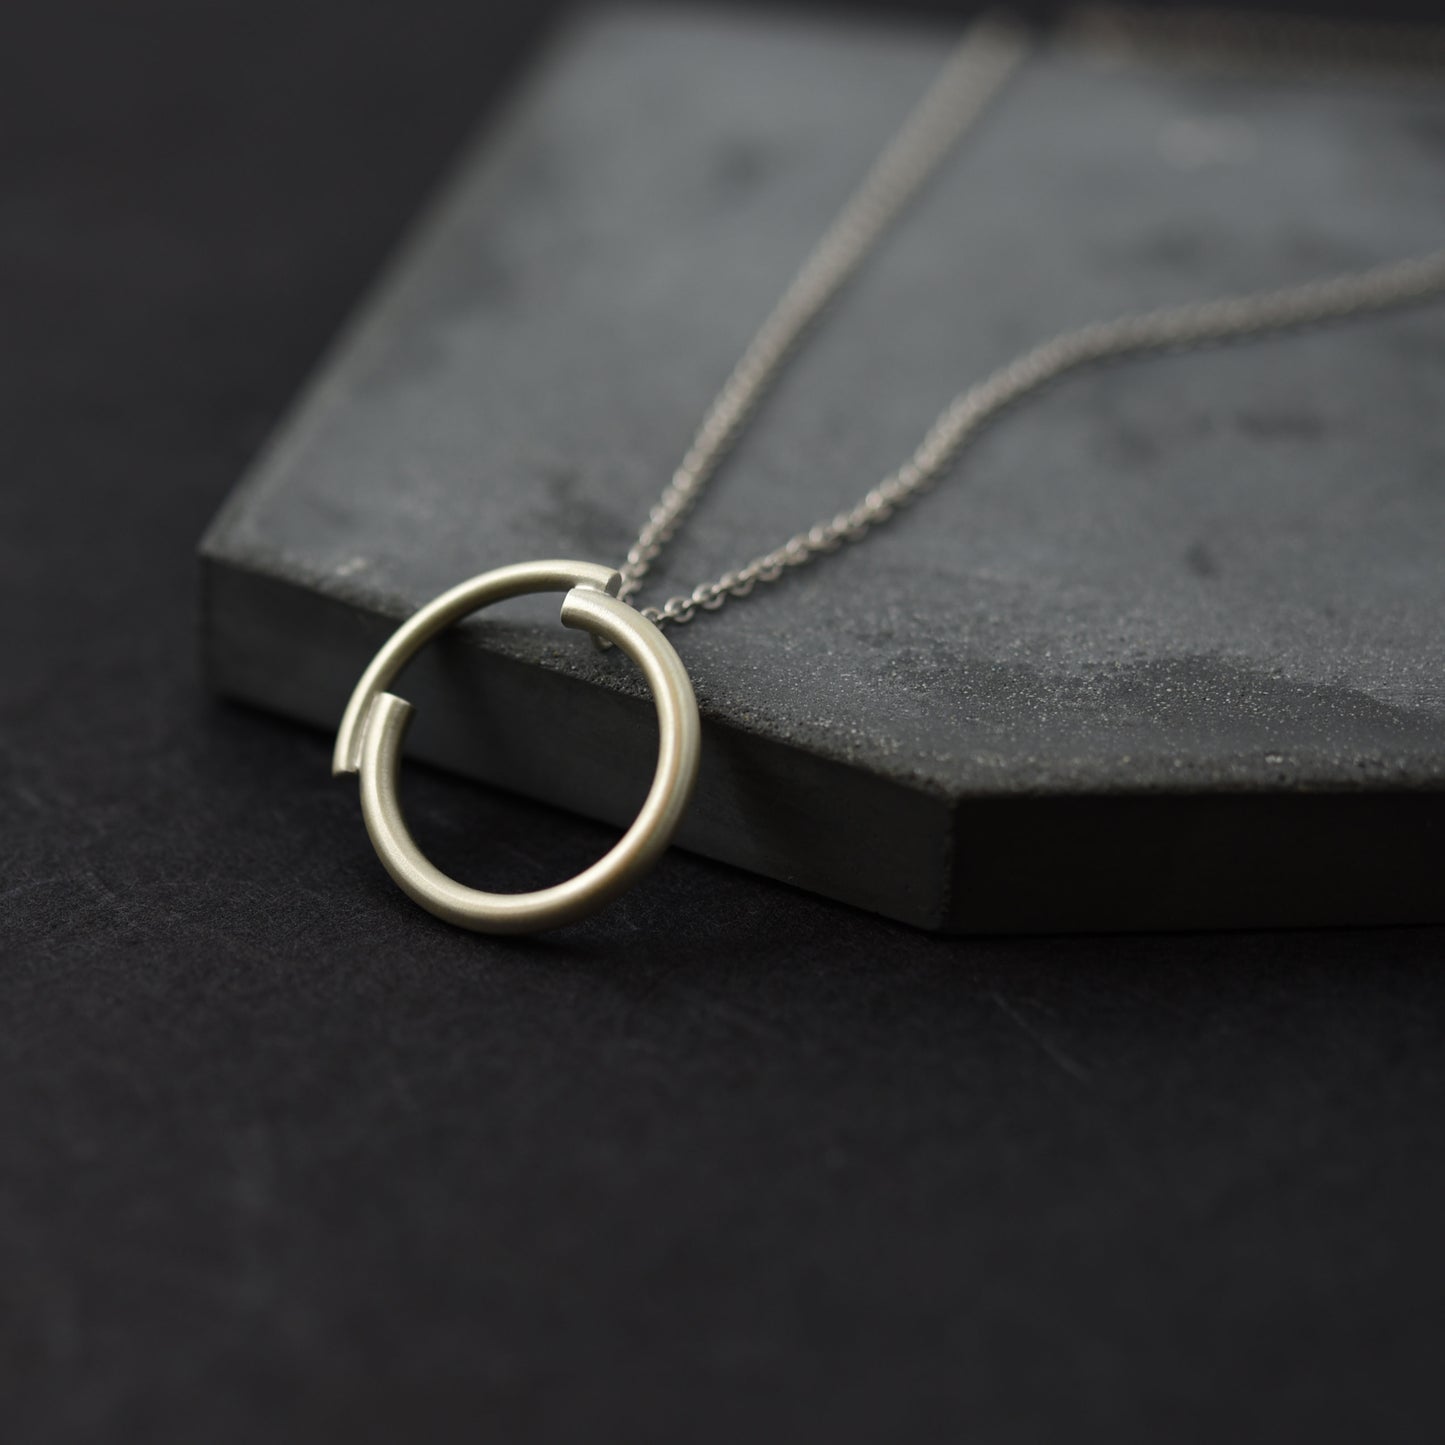 A close up of a silver circle pendant necklace of 22 millimetres diameter in a brushed matte finish in a dark blue background  